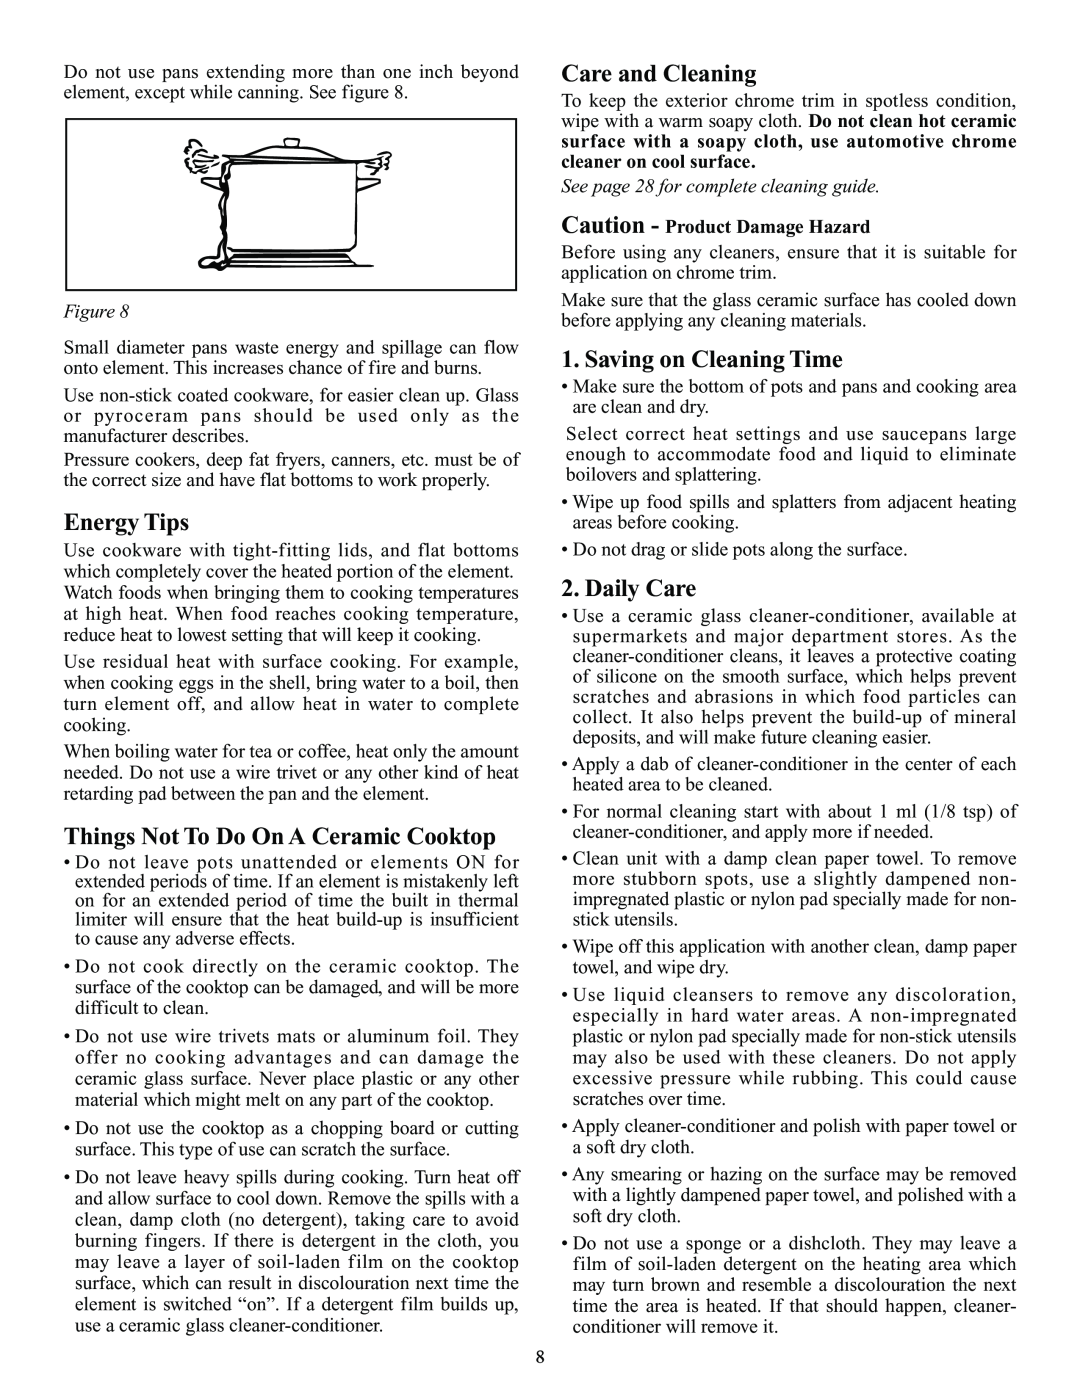 Elmira Stove Works 1954 Energy Tips, Things Not To Do On A Ceramic Cooktop, Care and Cleaning, Saving on Cleaning Time 